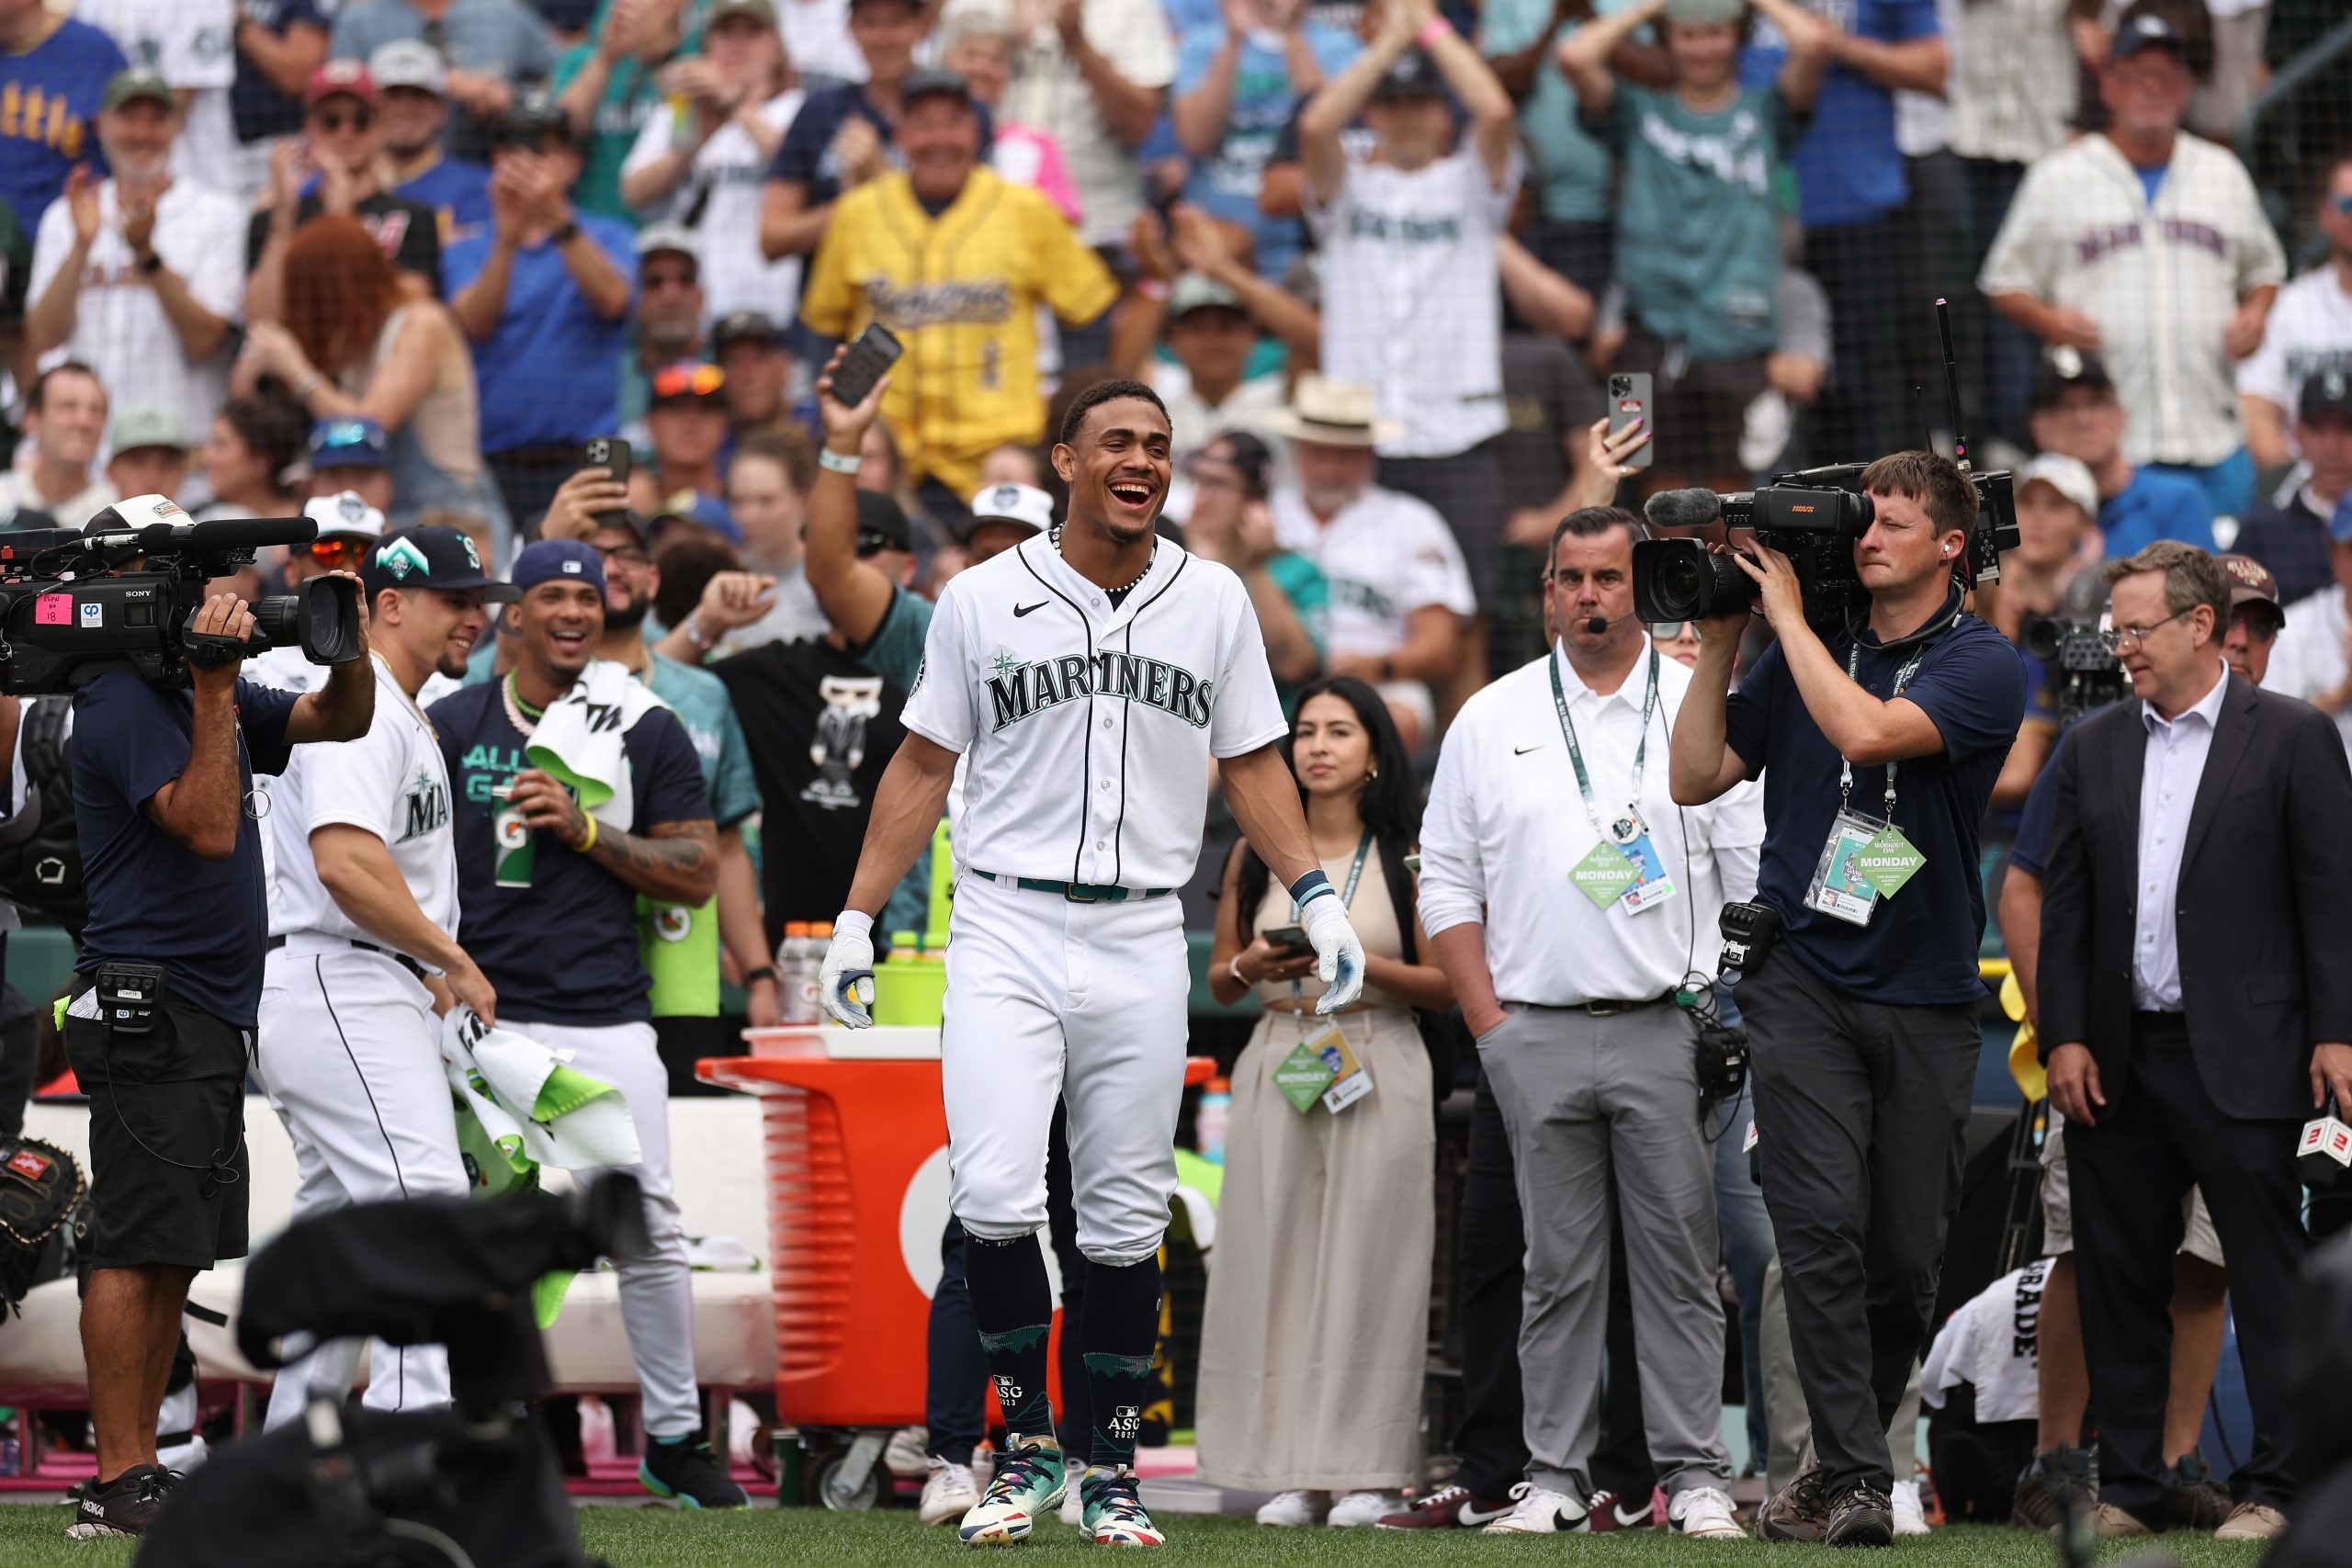 J-Rod Show goes on at All-Star with record Home Run Derby amid challening  season